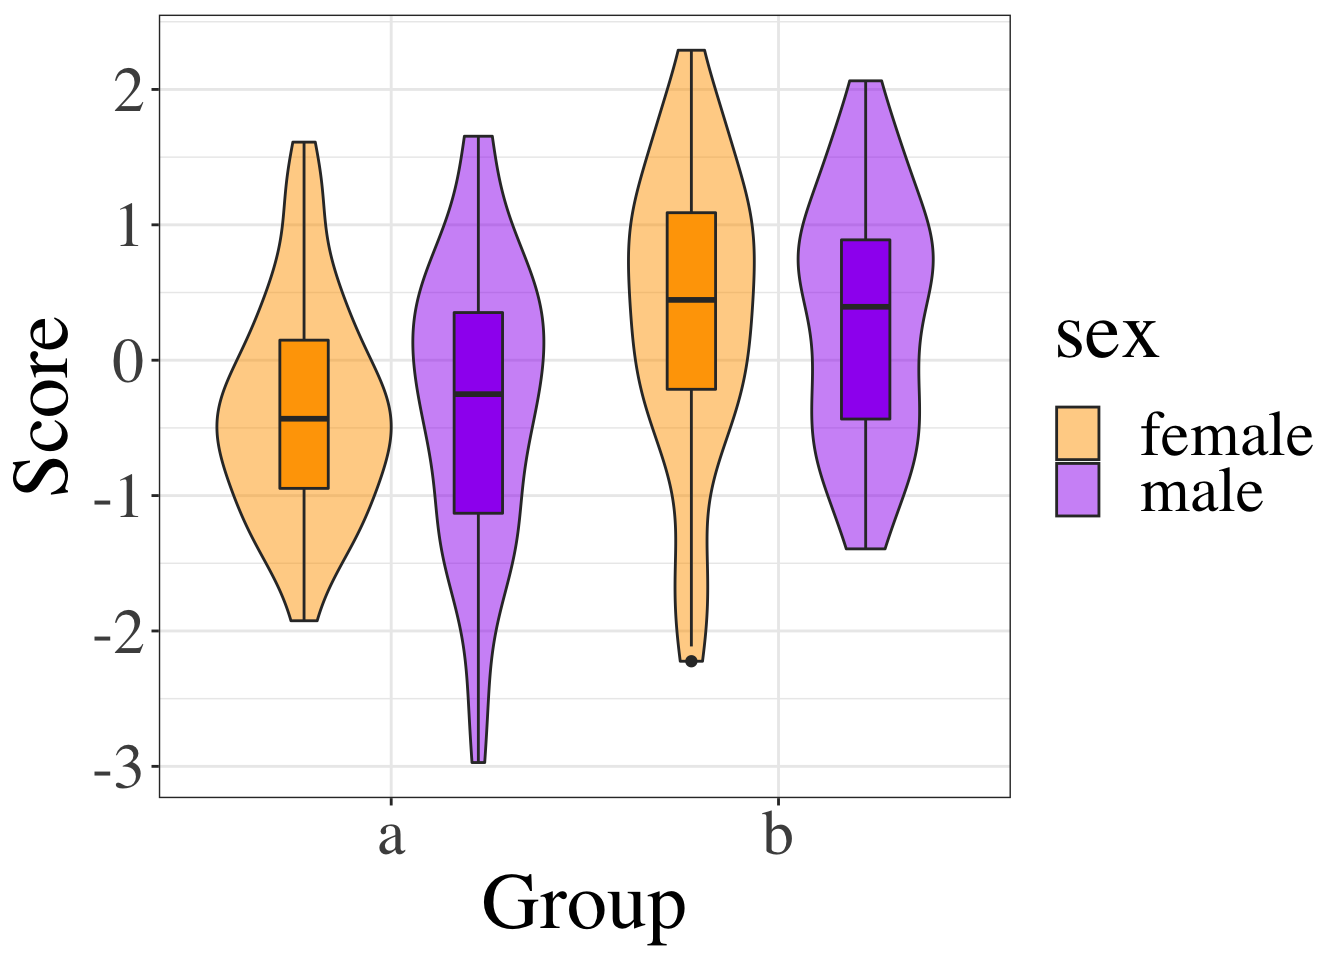 Figure 1. Scores by group and sex.